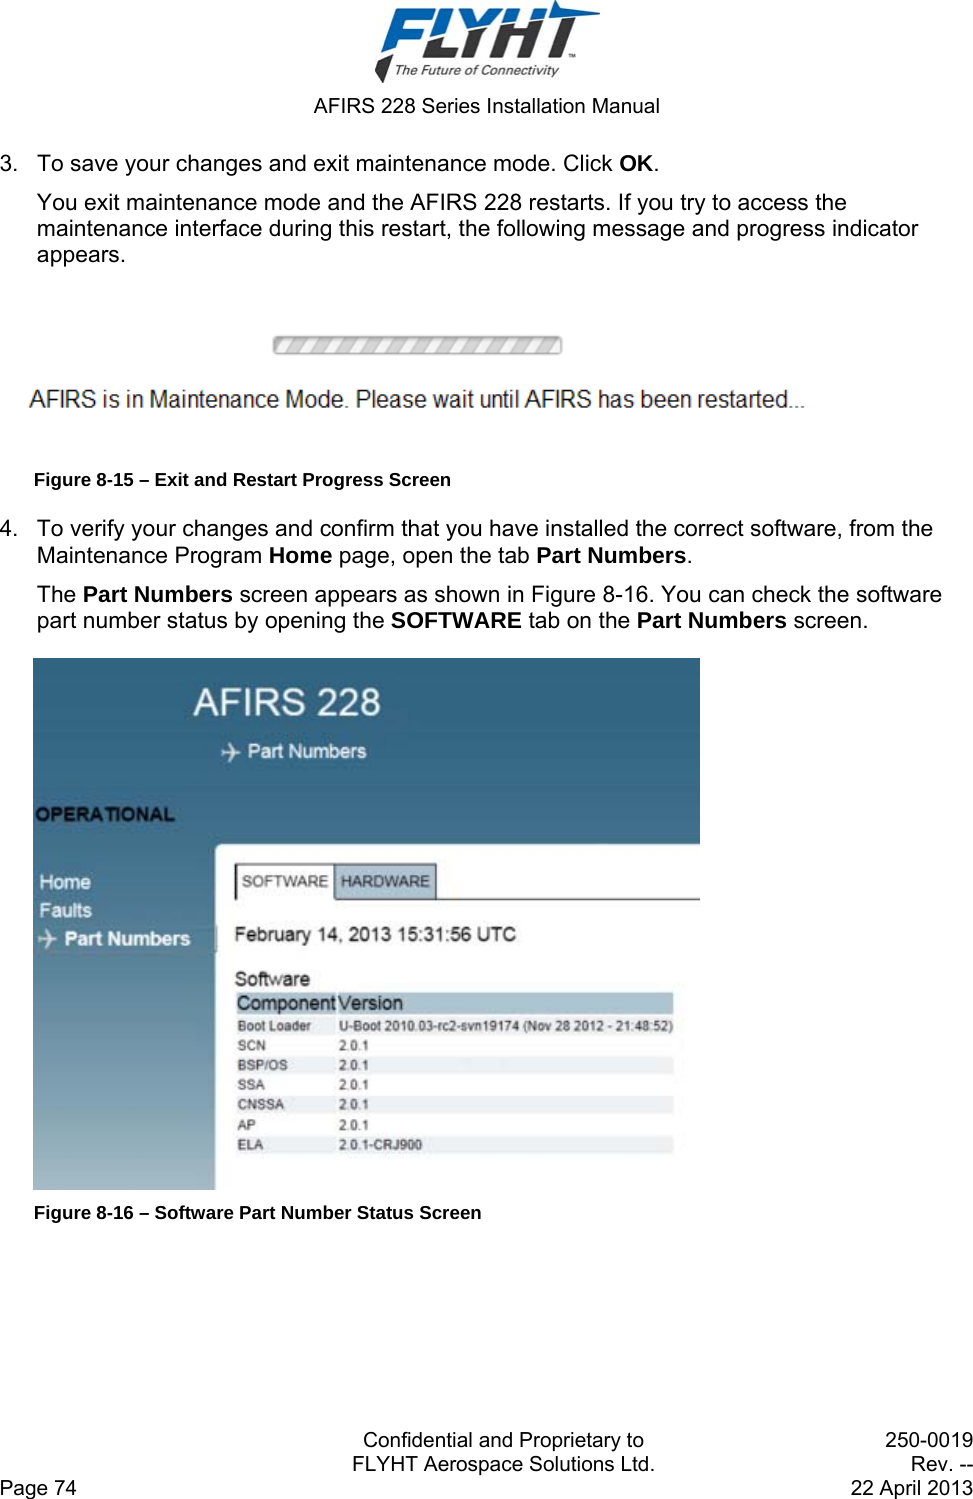  AFIRS 228 Series Installation Manual   Confidential and Proprietary to  250-0019   FLYHT Aerospace Solutions Ltd.  Rev. -- Page 74    22 April 2013 3.  To save your changes and exit maintenance mode. Click OK. You exit maintenance mode and the AFIRS 228 restarts. If you try to access the maintenance interface during this restart, the following message and progress indicator appears.  Figure 8-15 – Exit and Restart Progress Screen 4.  To verify your changes and confirm that you have installed the correct software, from the Maintenance Program Home page, open the tab Part Numbers. The Part Numbers screen appears as shown in Figure 8-16. You can check the software part number status by opening the SOFTWARE tab on the Part Numbers screen.  Figure 8-16 – Software Part Number Status Screen   